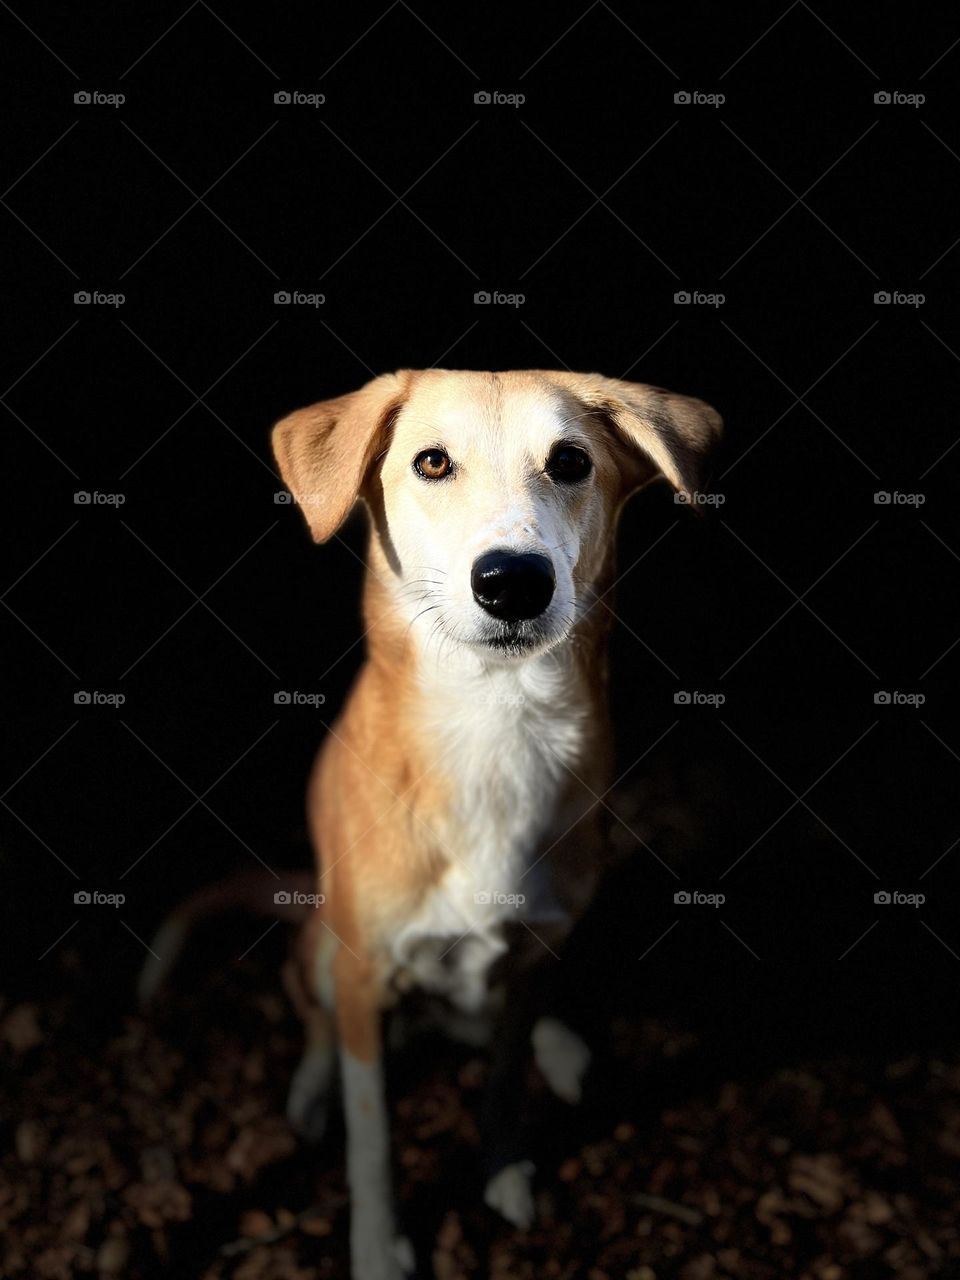 Portrait of pet dog seated and looking directly into the camera. The lighting is dramatic and emphasizes her gaze.